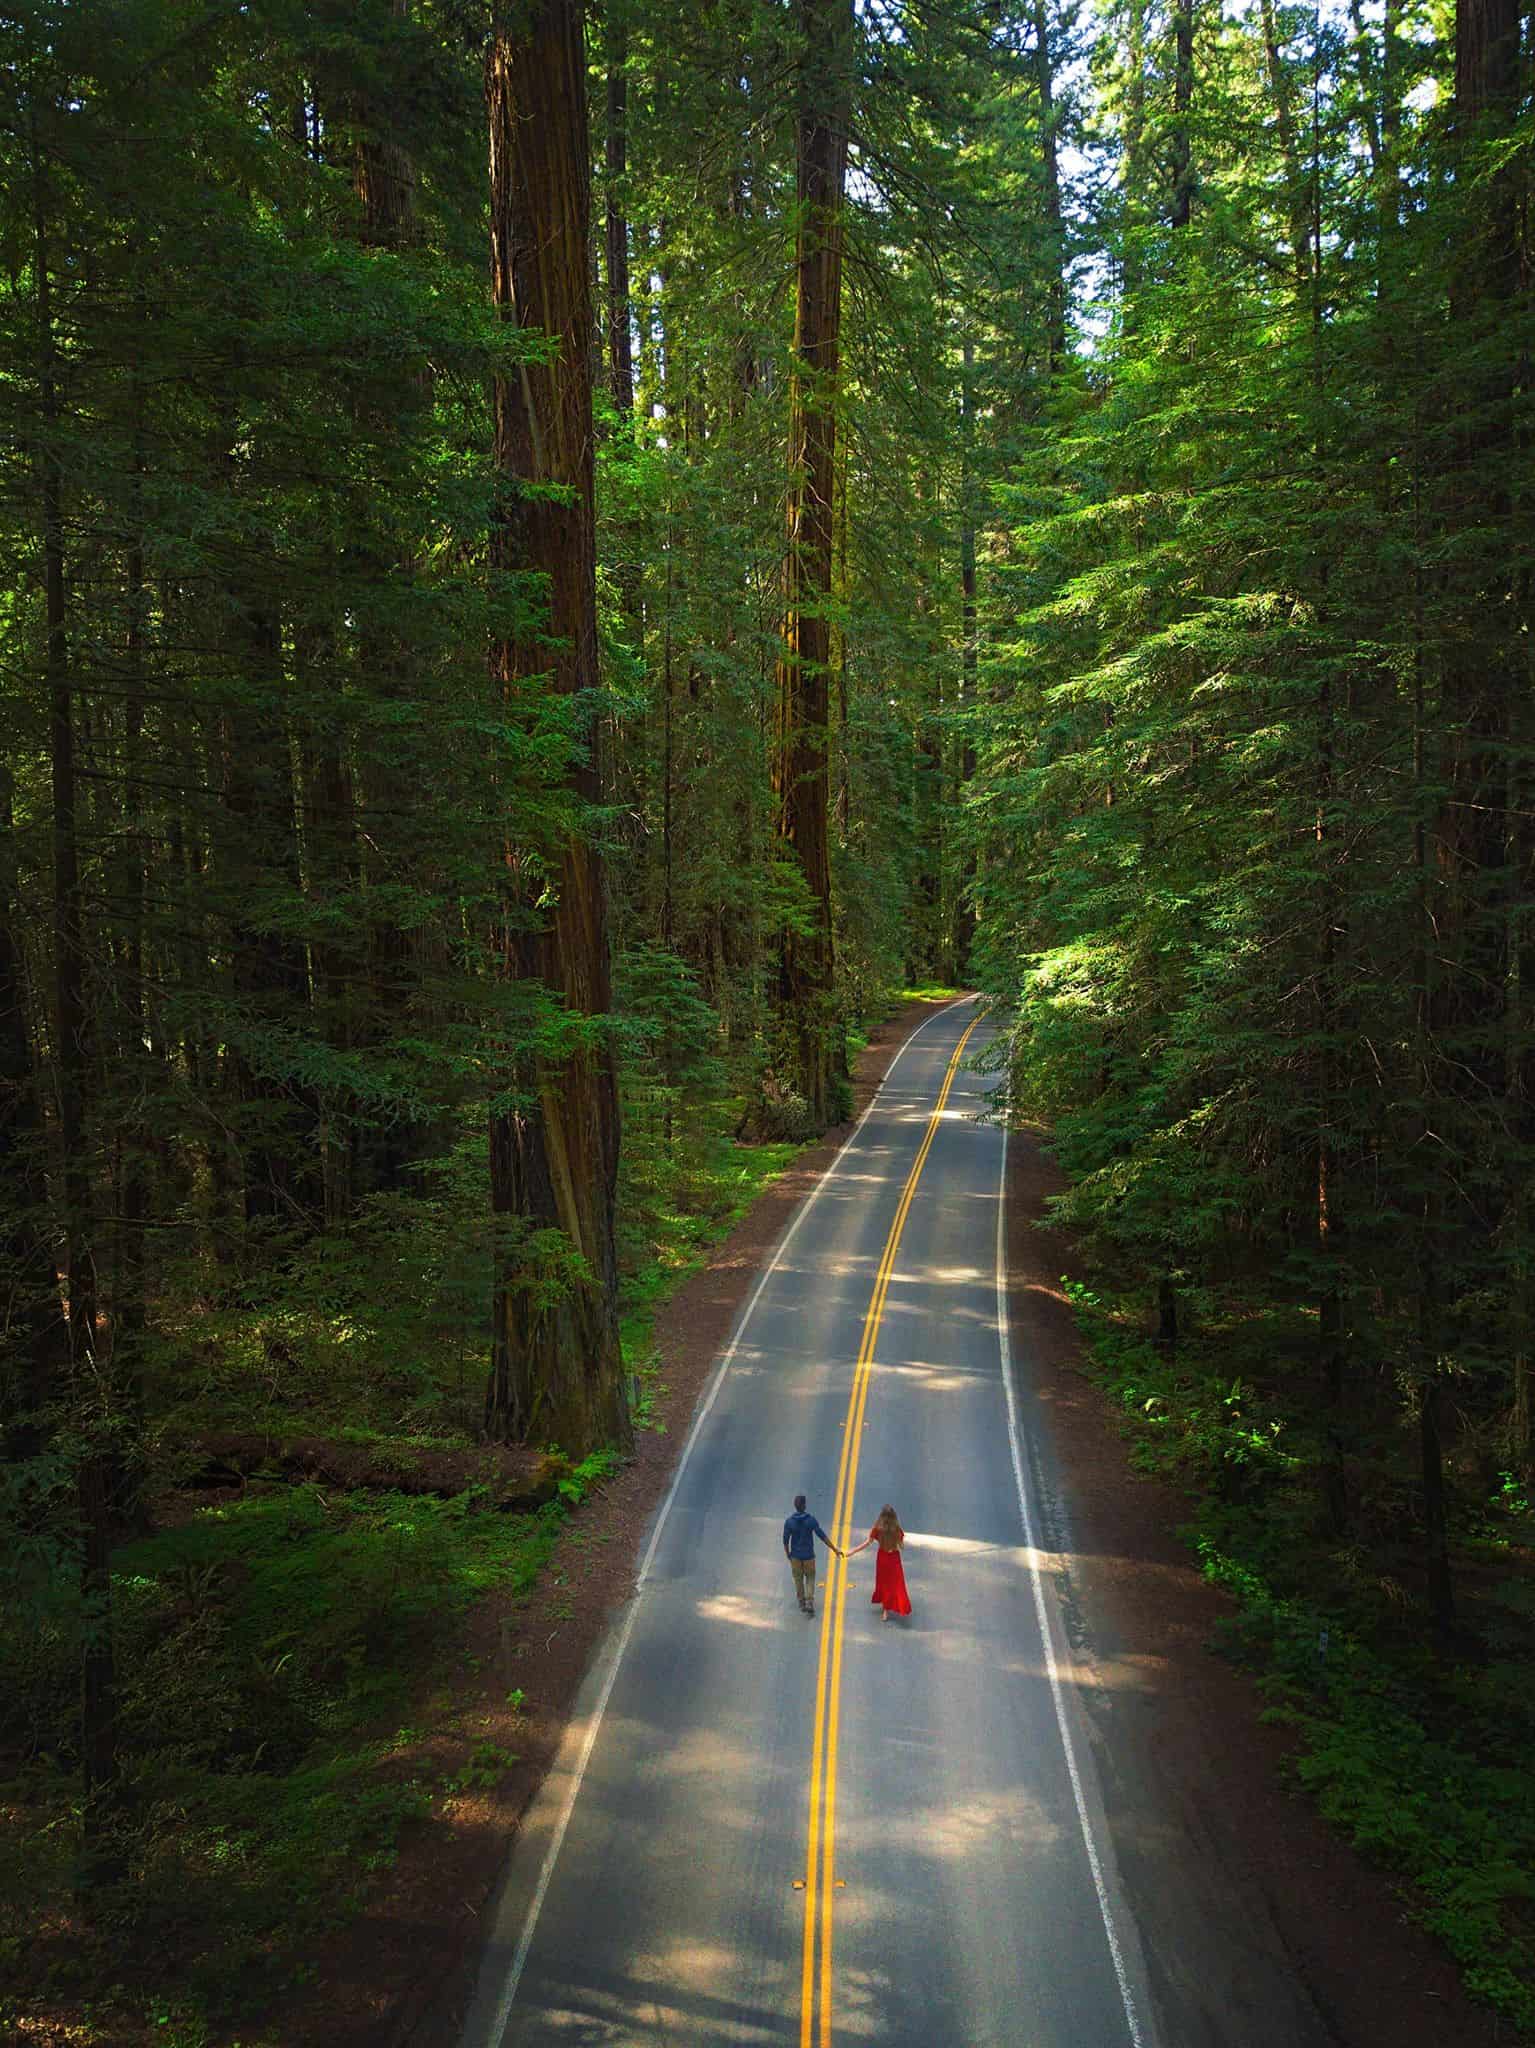 Aerial view of a couple standing in the middle of the road in the Avenue of Giants area of Northern California. The woman is wearing a long red dress and the man is wearing a blue shirt and khaki pants. The road goes out of frame and is surrounded by massive trees on both sides.